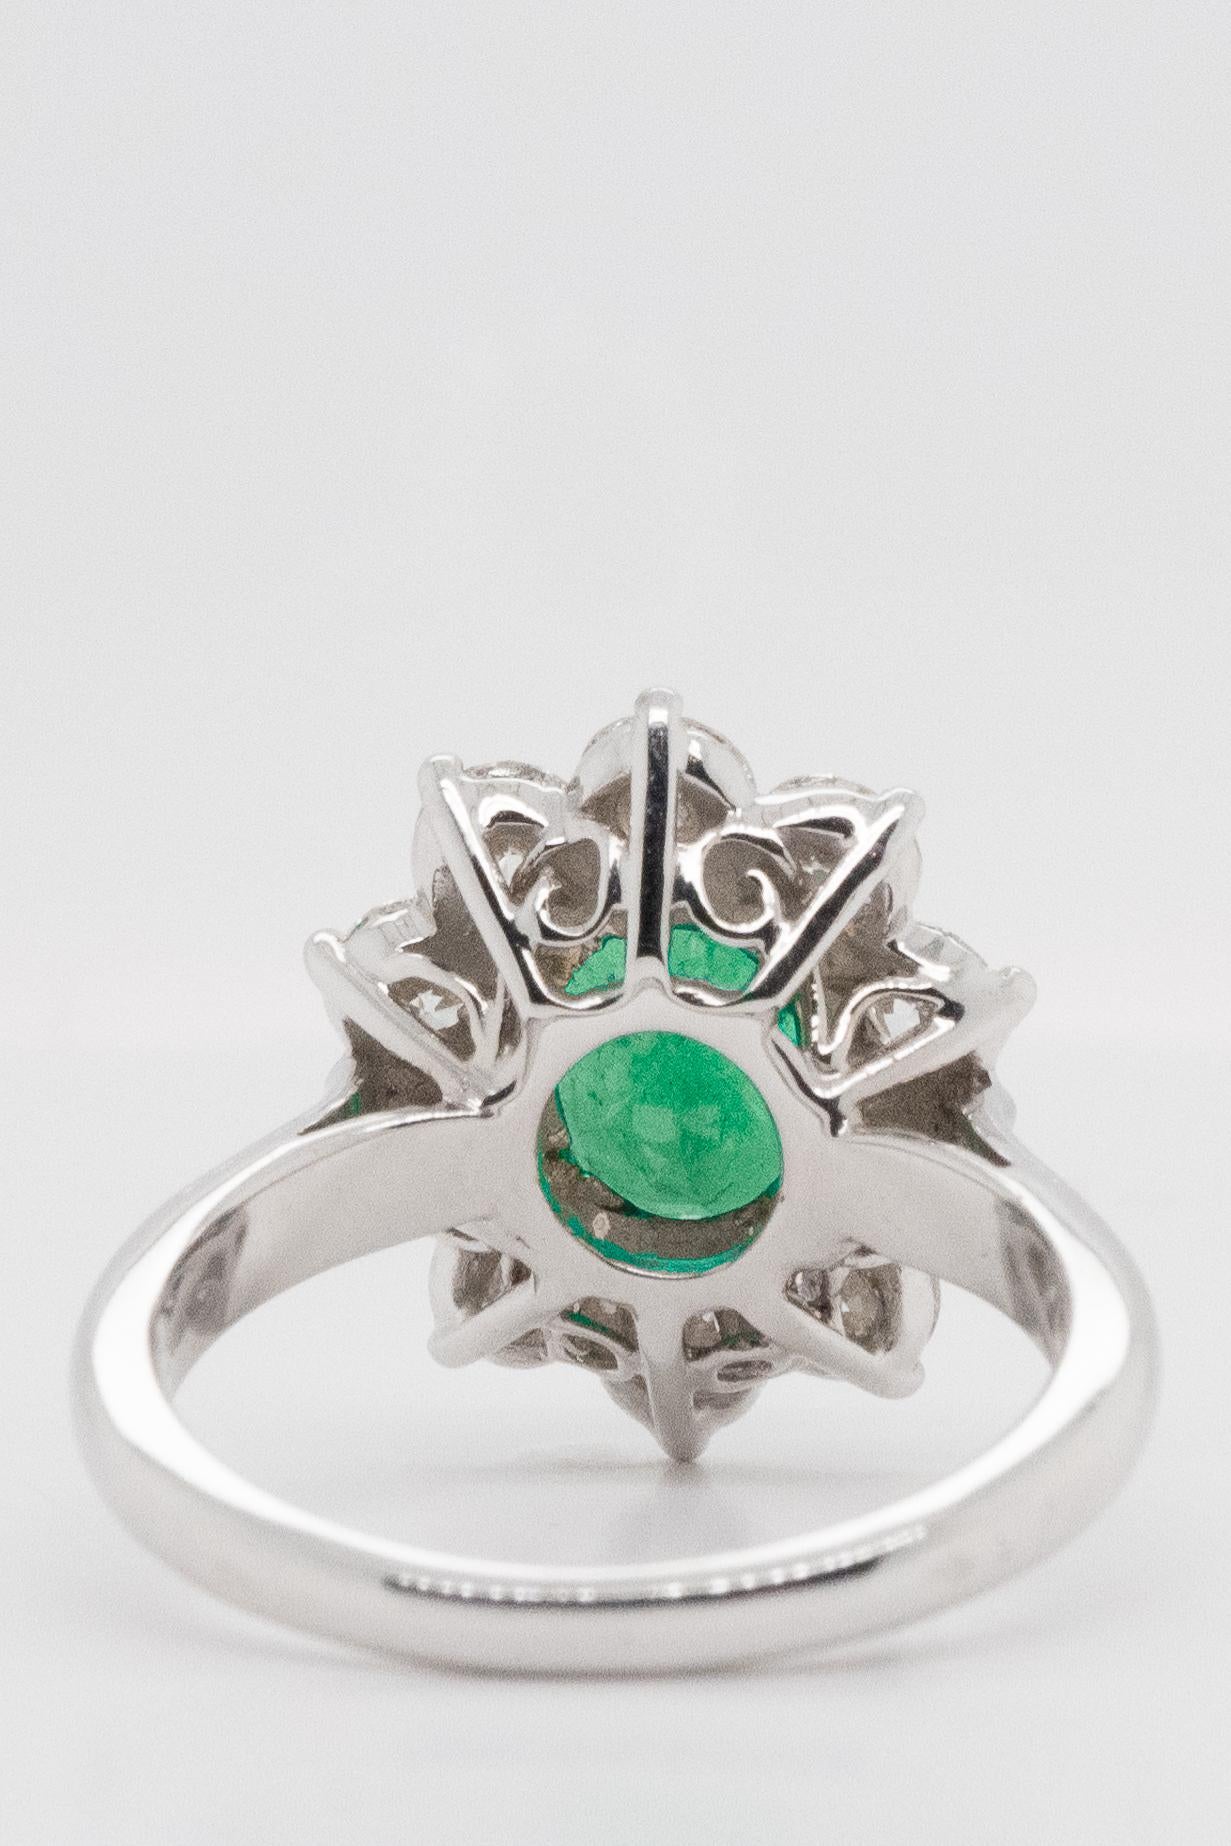 Oval Cut Certified Emerald Ring, Diamonds White Gold  For Sale